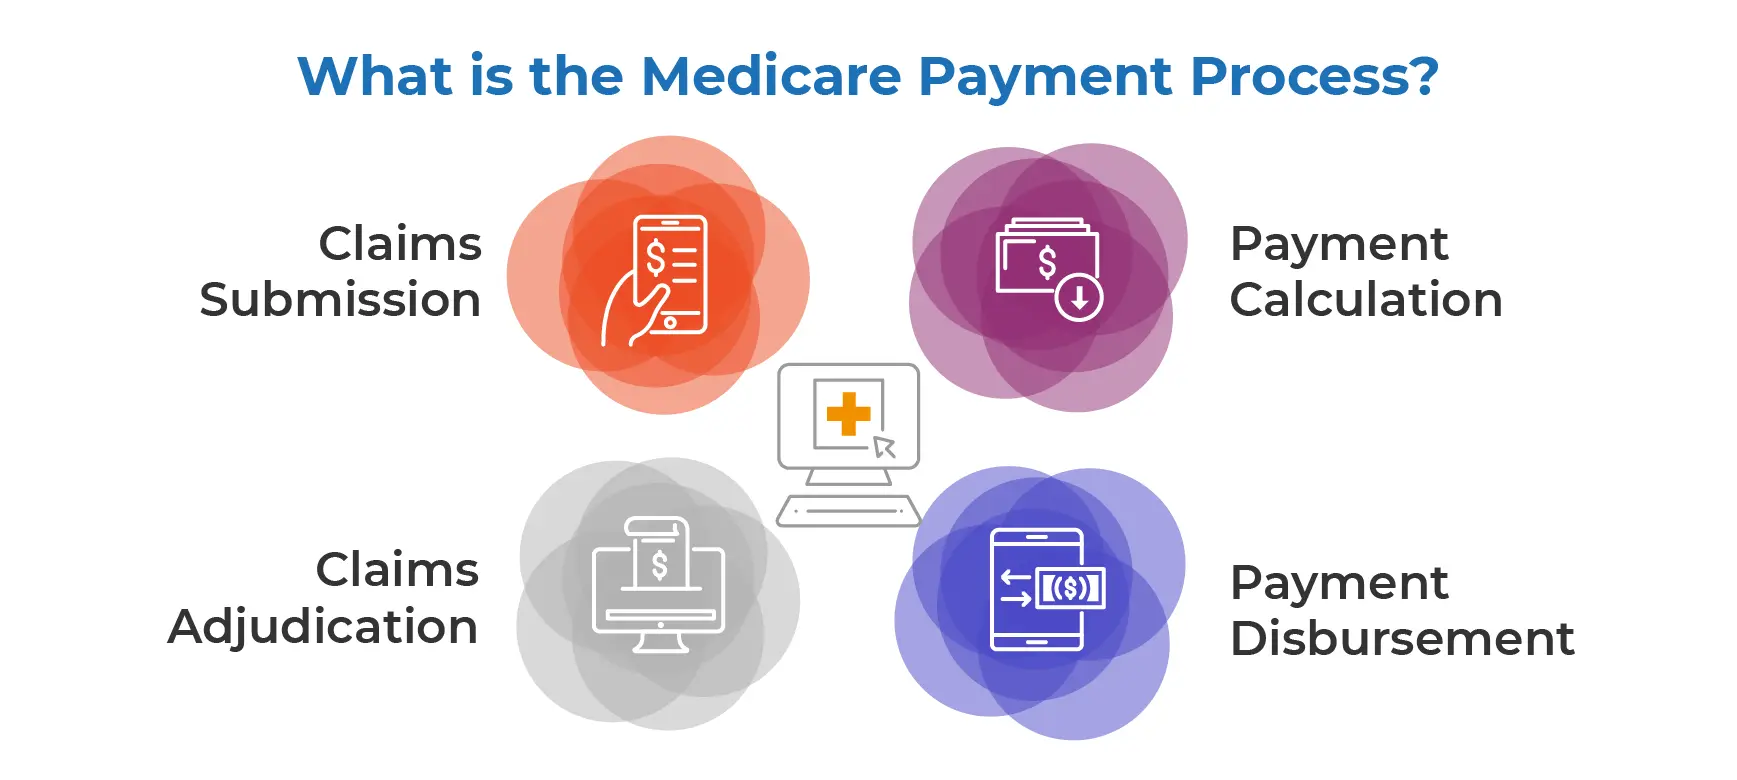 What is the Medicare Payment Process?